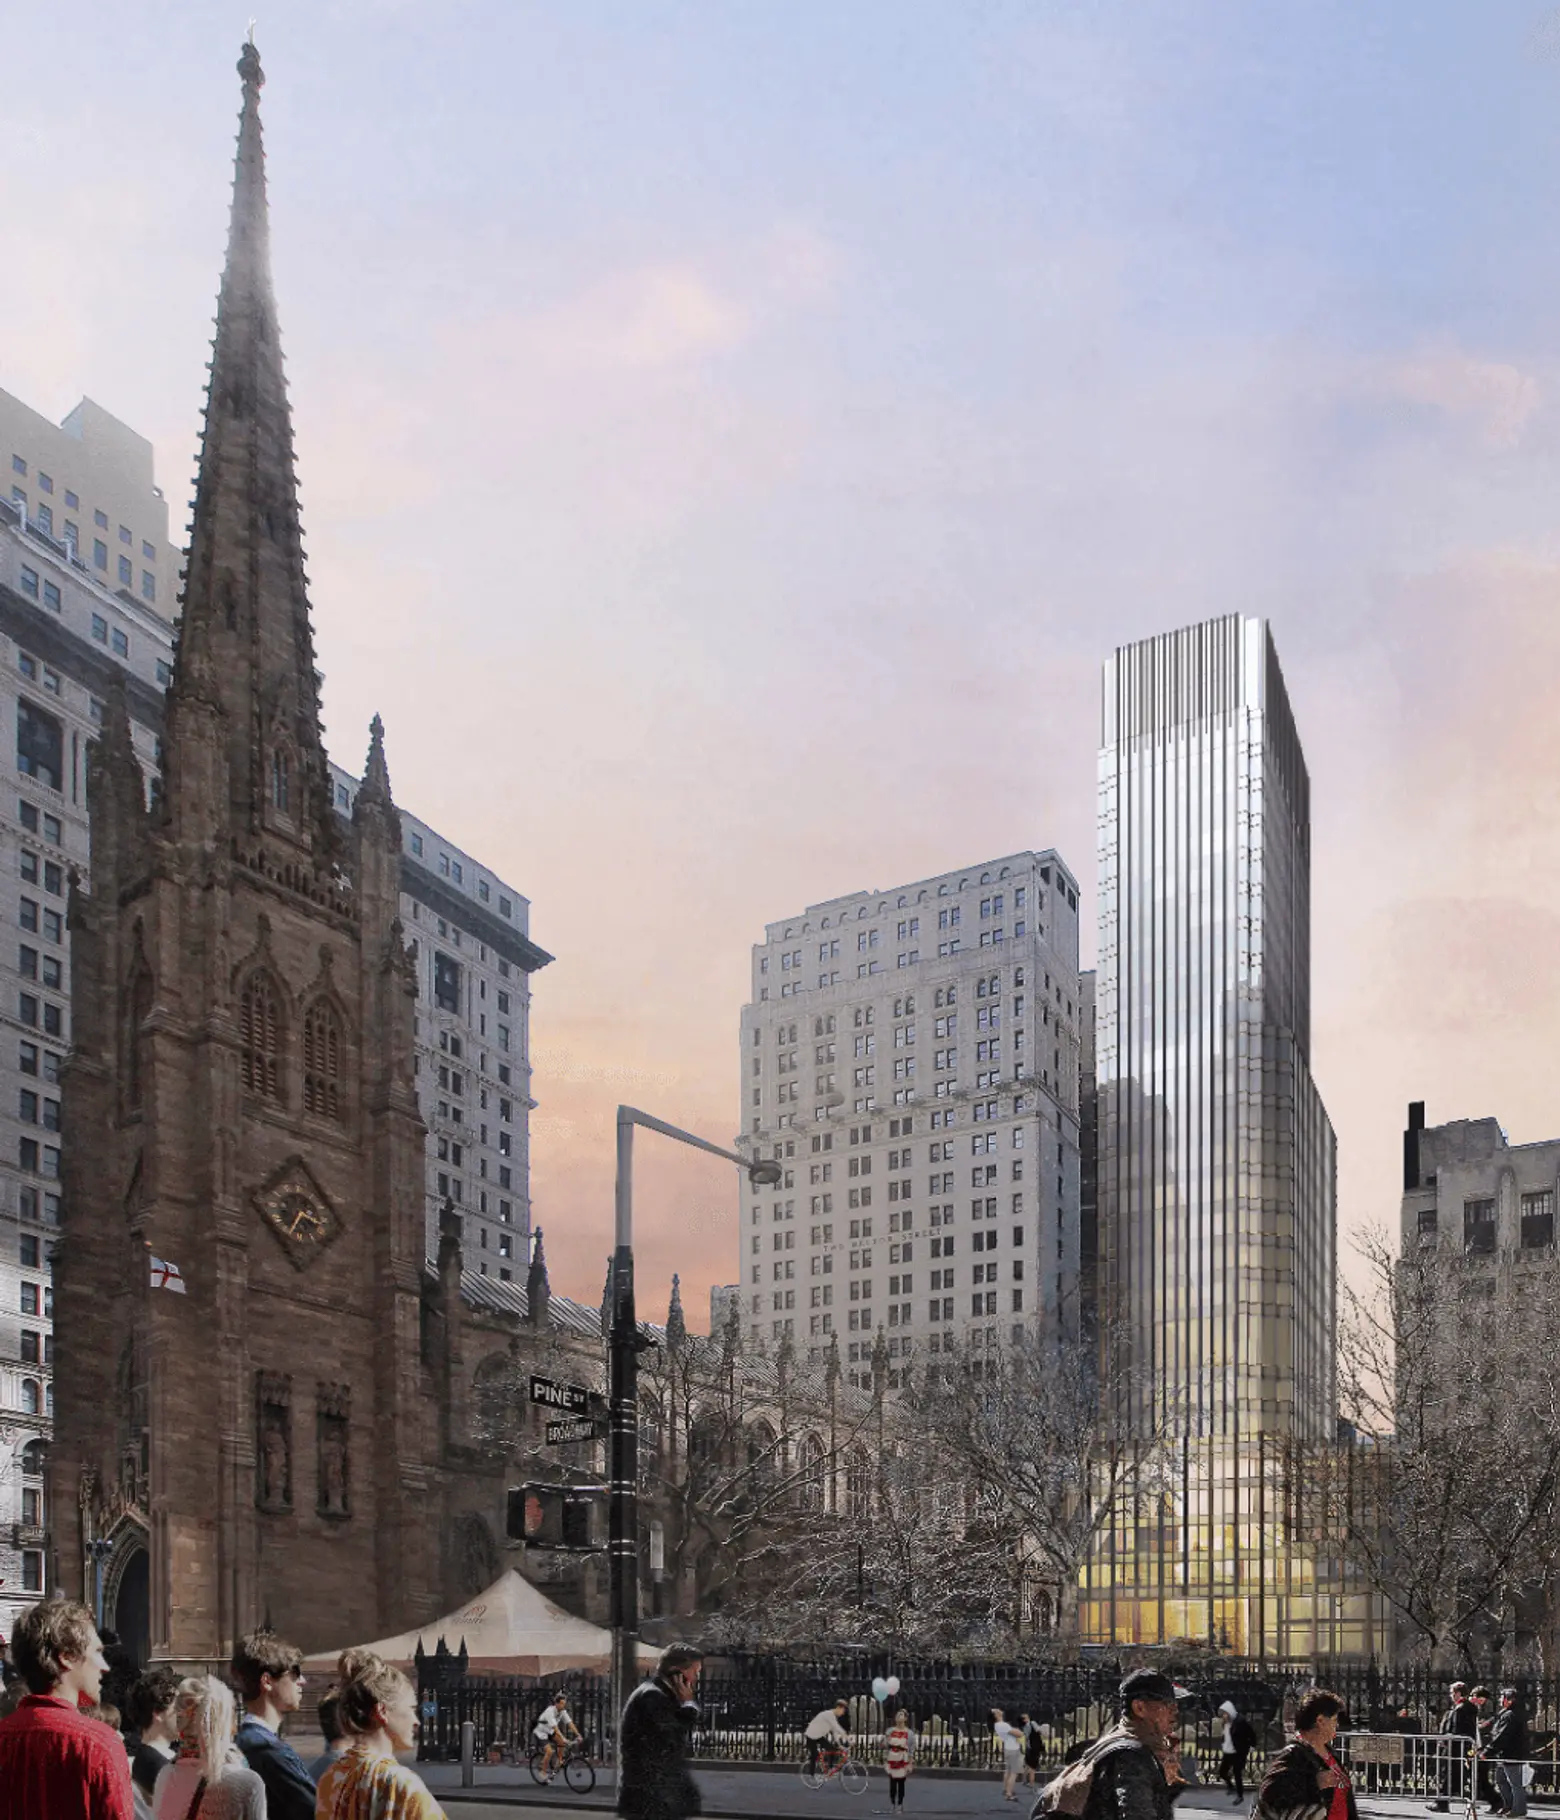 Trinity Church reveals plans for $300M Pelli Clarke Pelli-designed tower to rise behind historic church